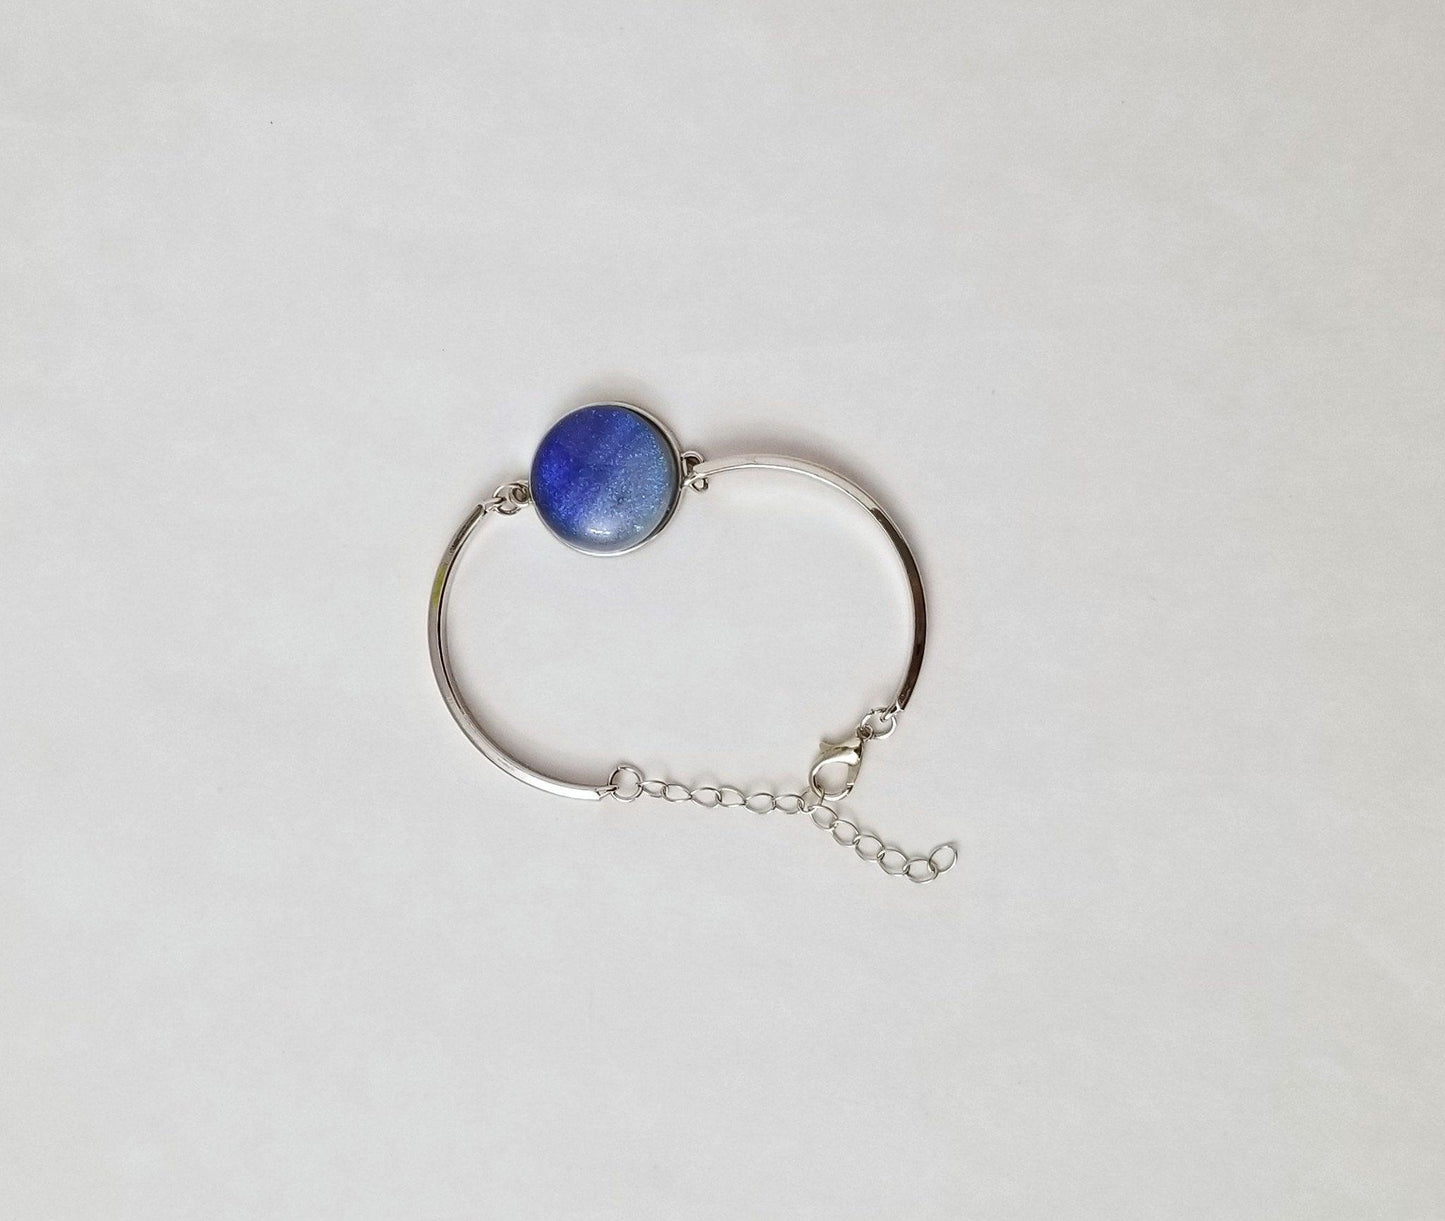 Delicate Adjustable Bracelet,  silver tone with Variated Blue Dichroic fused glass cabochon